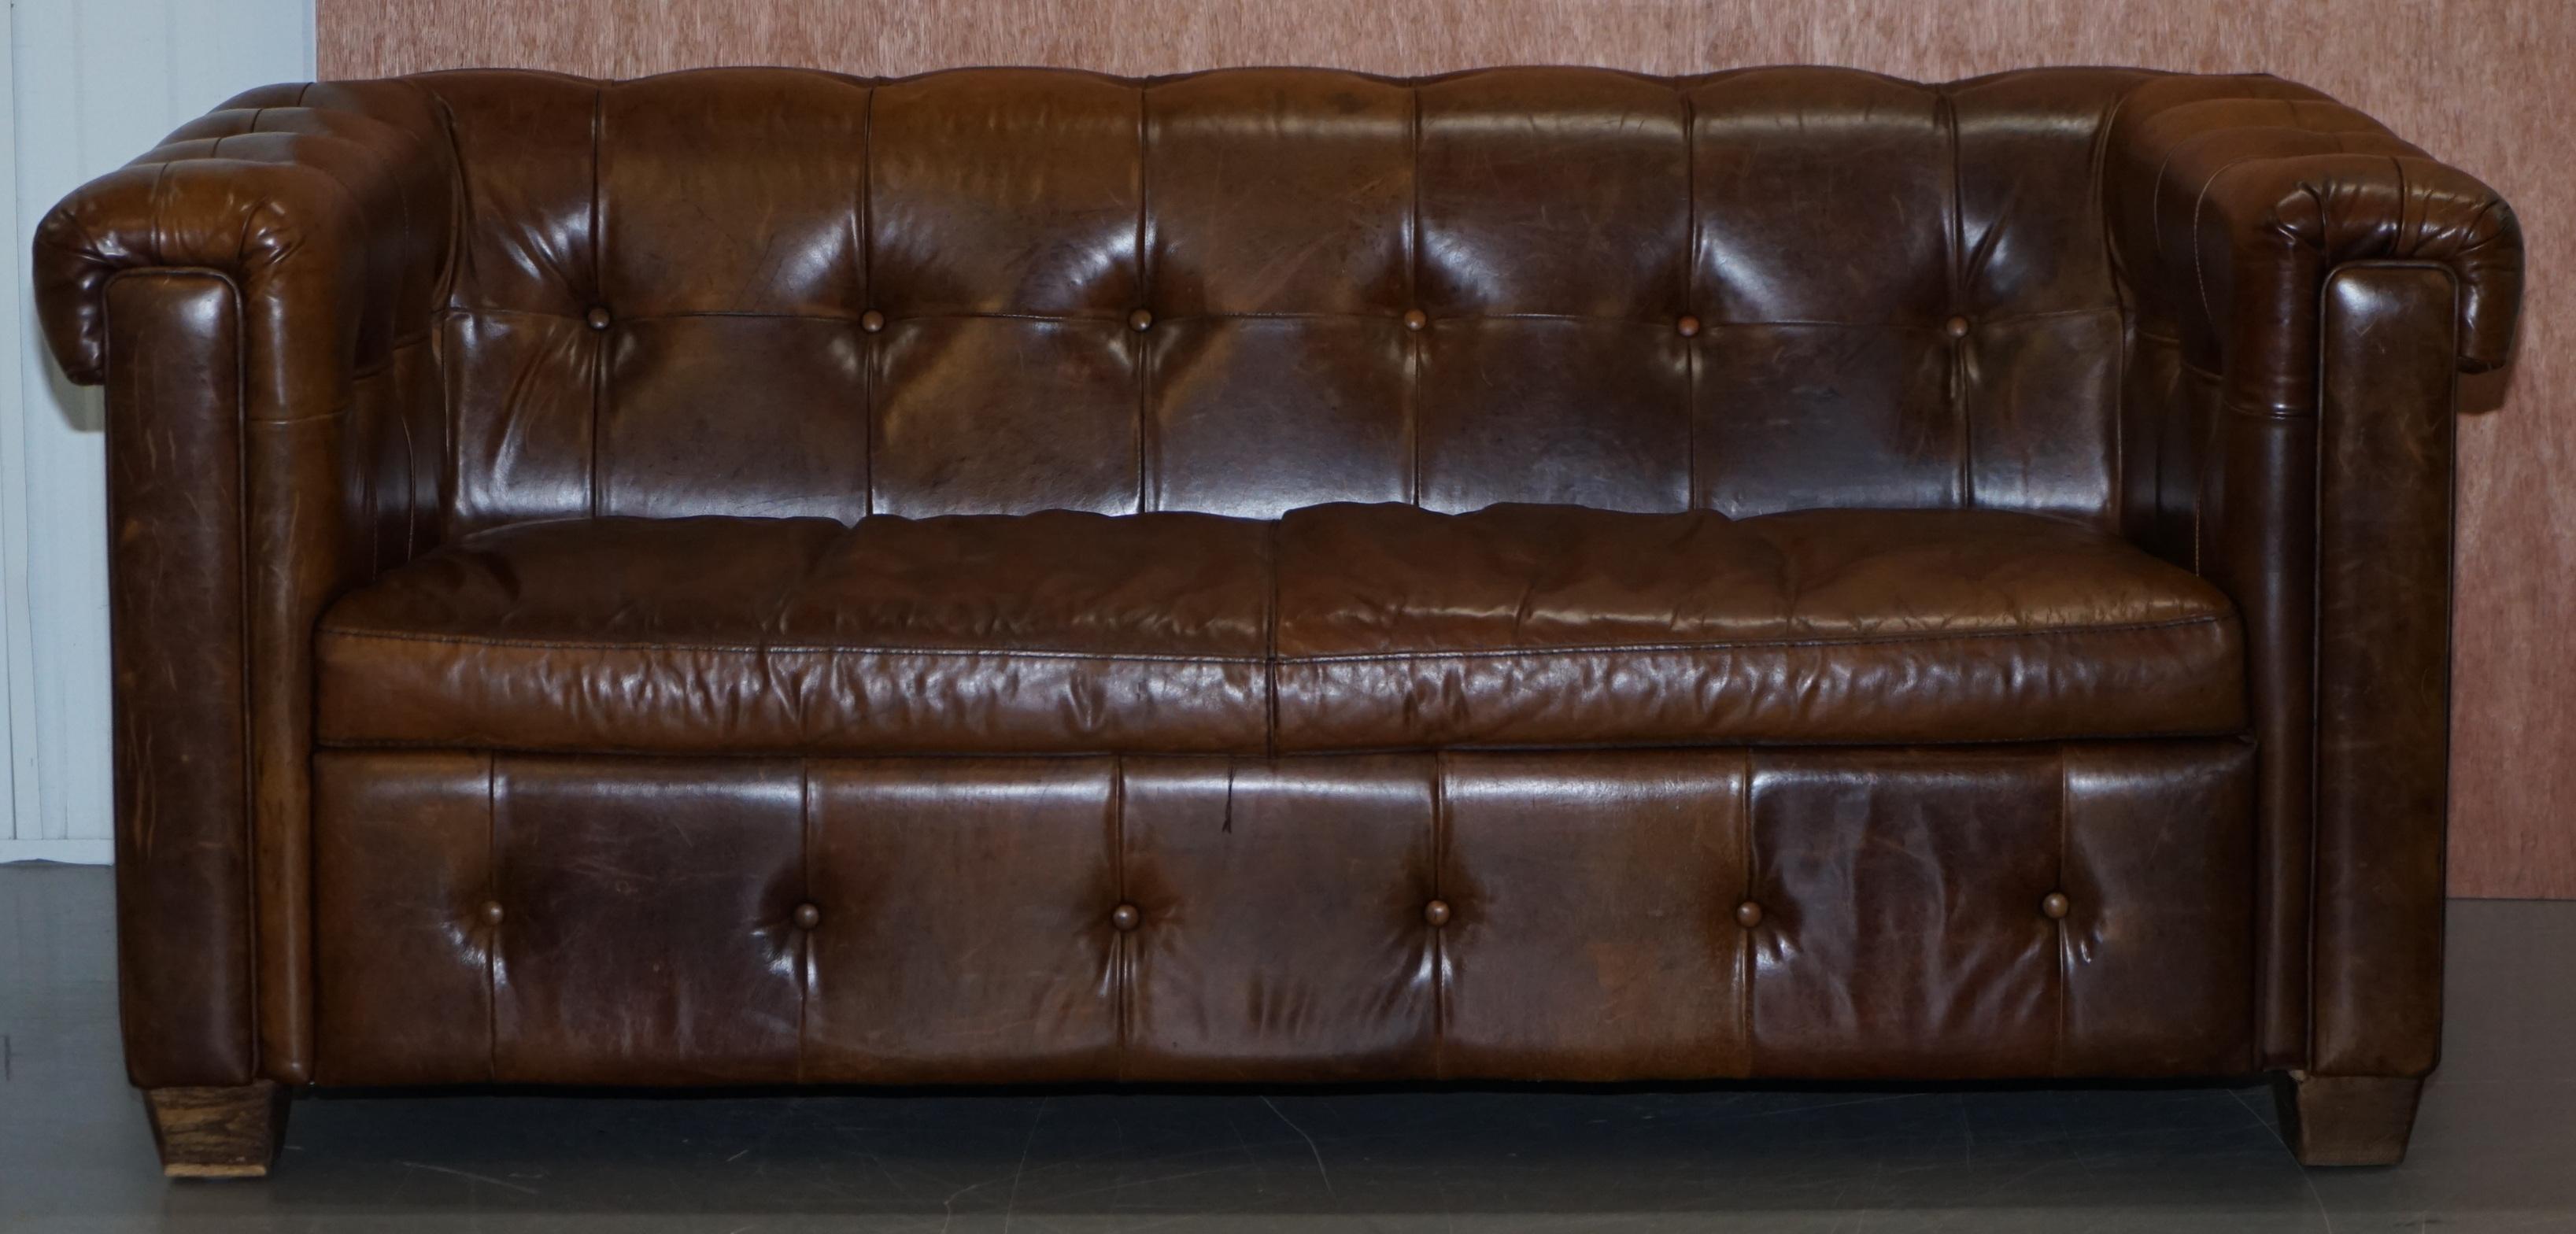 We are delighted to this lovely and stylish vintage heritage leather tufted sofa

A good looking well-made and cool sofa, its upholstered with fully aniline leather which is hand dyed six times to give it this vintage distressed 100 year old look